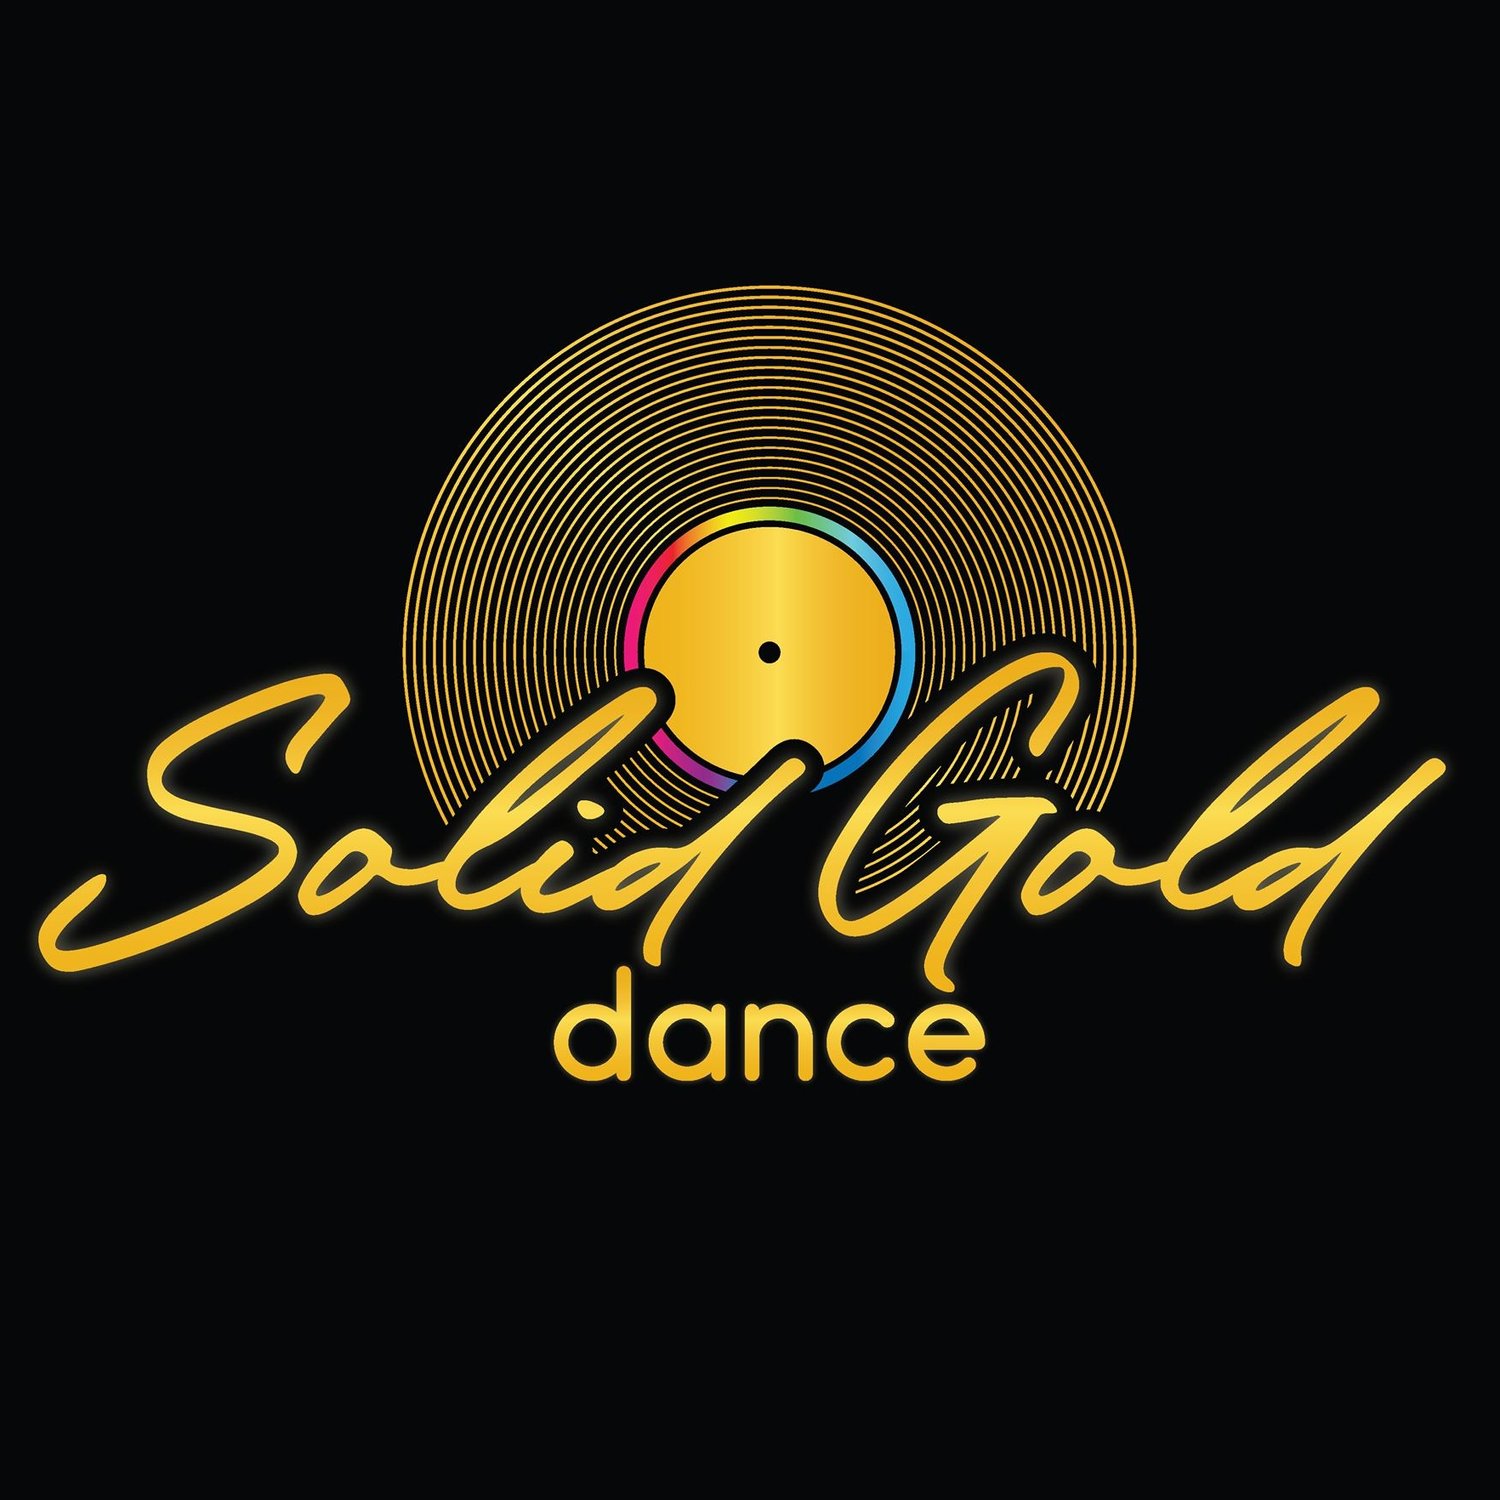 Solid Gold Dance Inc.